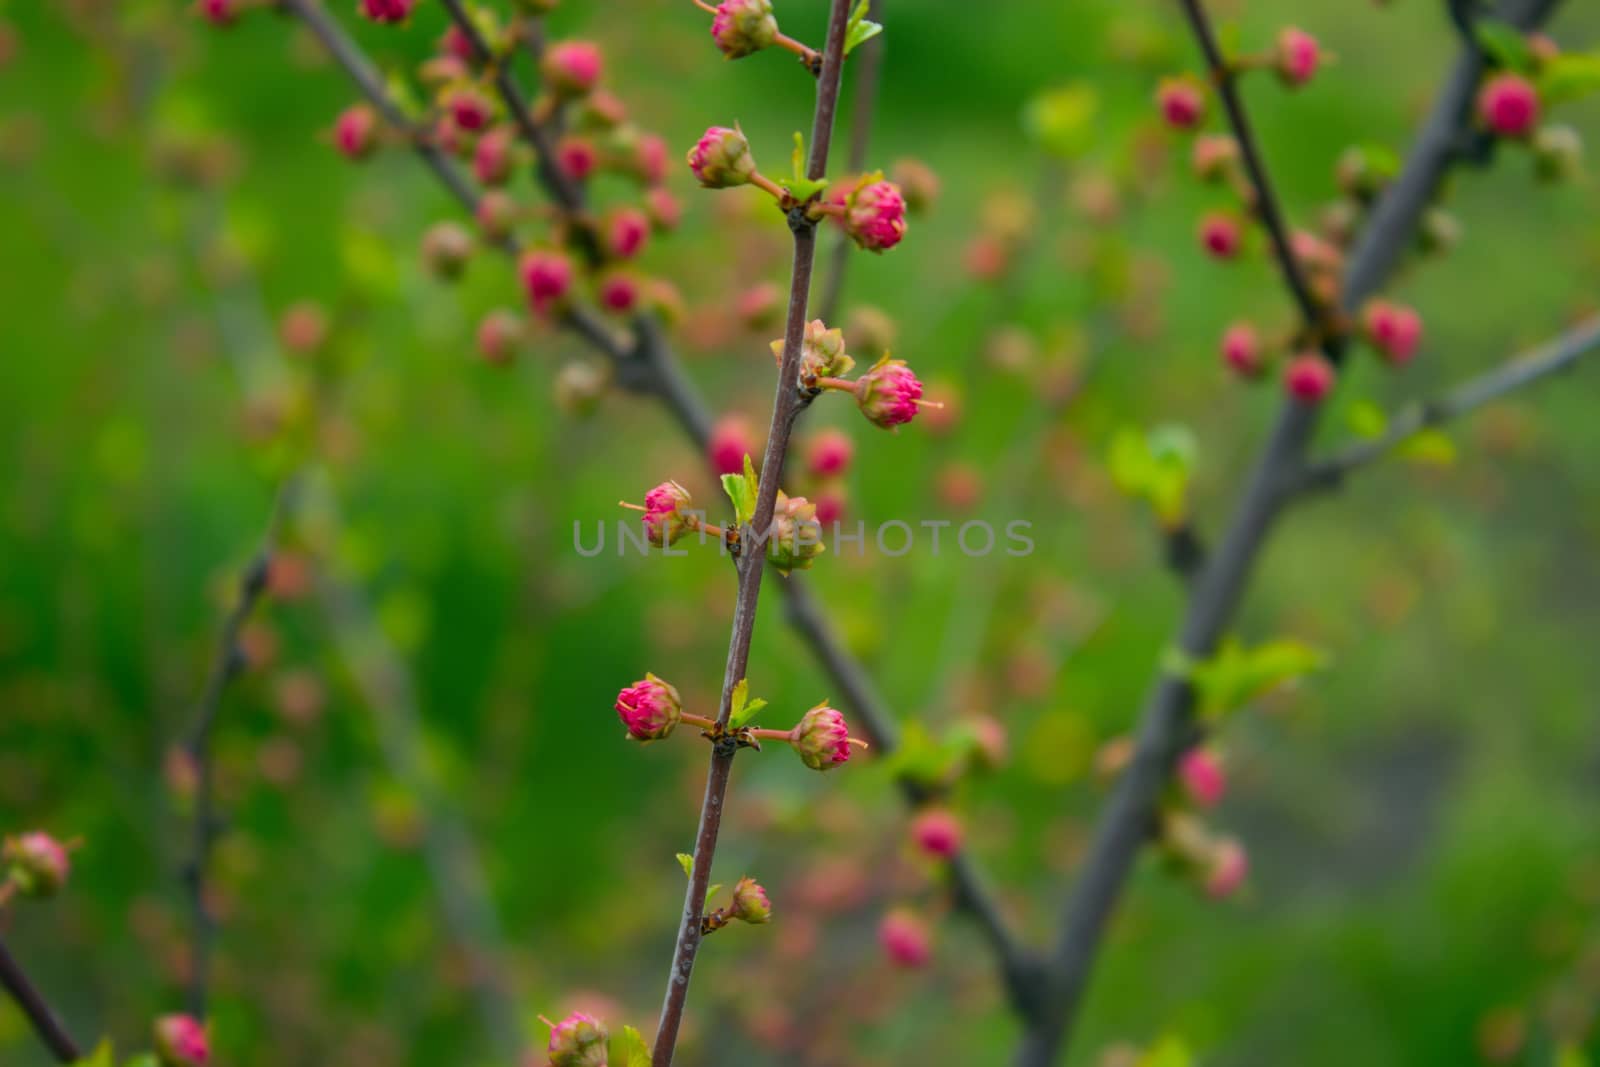 branch with little pink flowers, twig shrub with small pink flowers, flowers in the garden at springtime 